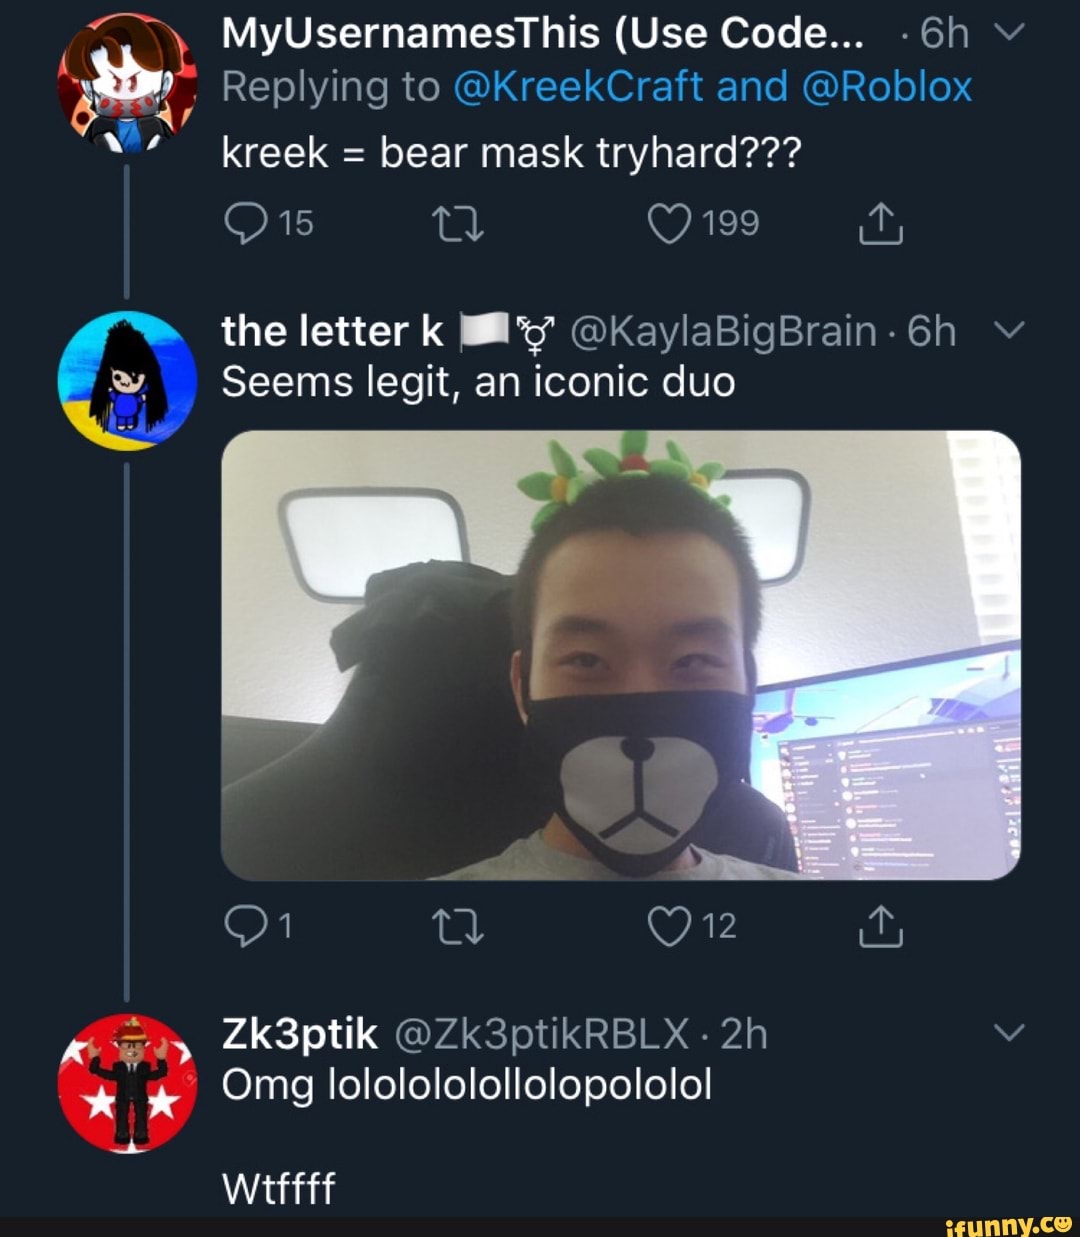 Myusernamesthis Use Code 6h Replying To Kreekcraft And Roblox Kreek Bear Mask Tryhard The Letter K By Okaylabigbrain 6h Y Seems Legit An Iconic Duo Omg Lololololollolopololo Ifunny - new roblox bear mask code